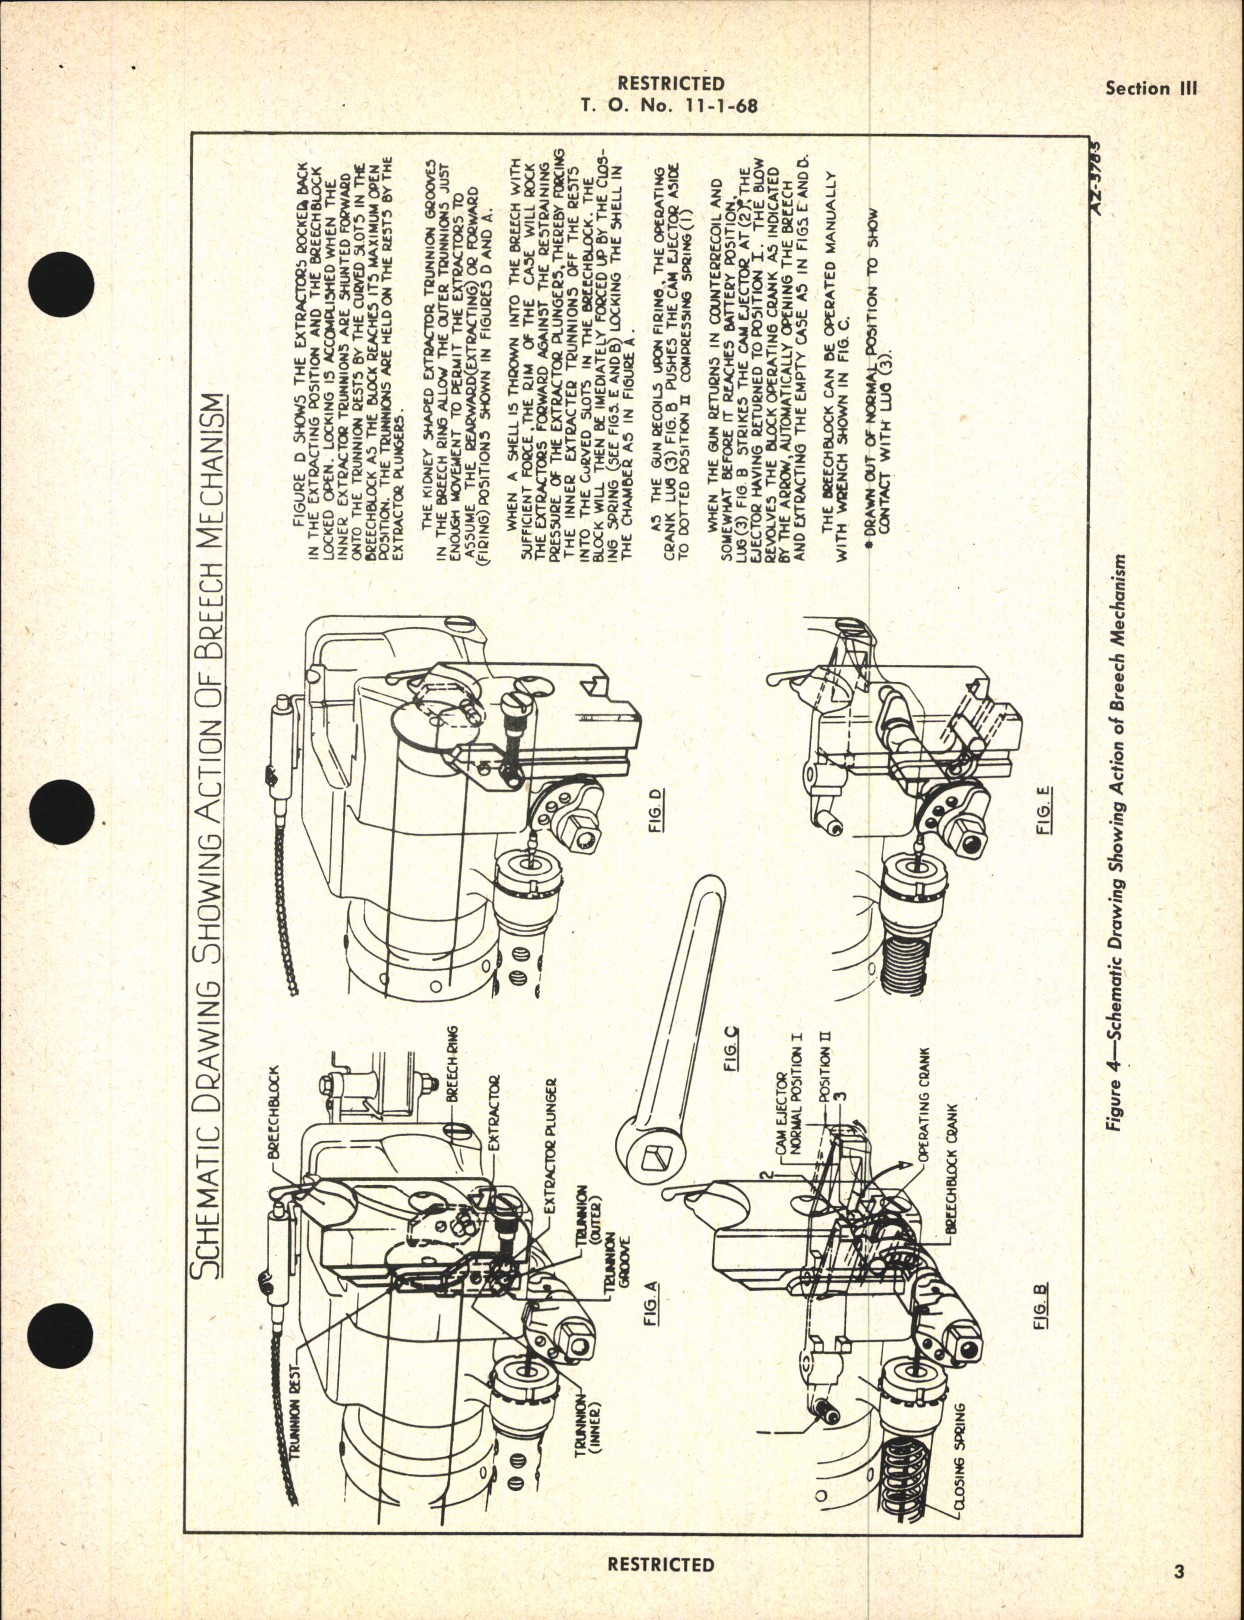 Sample page 7 from AirCorps Library document: Handbook of Instructions with Parts Catalog for 75-MM Aircraft Gun, AN-M5 (T13E1) and AN-M9 (T13E2)